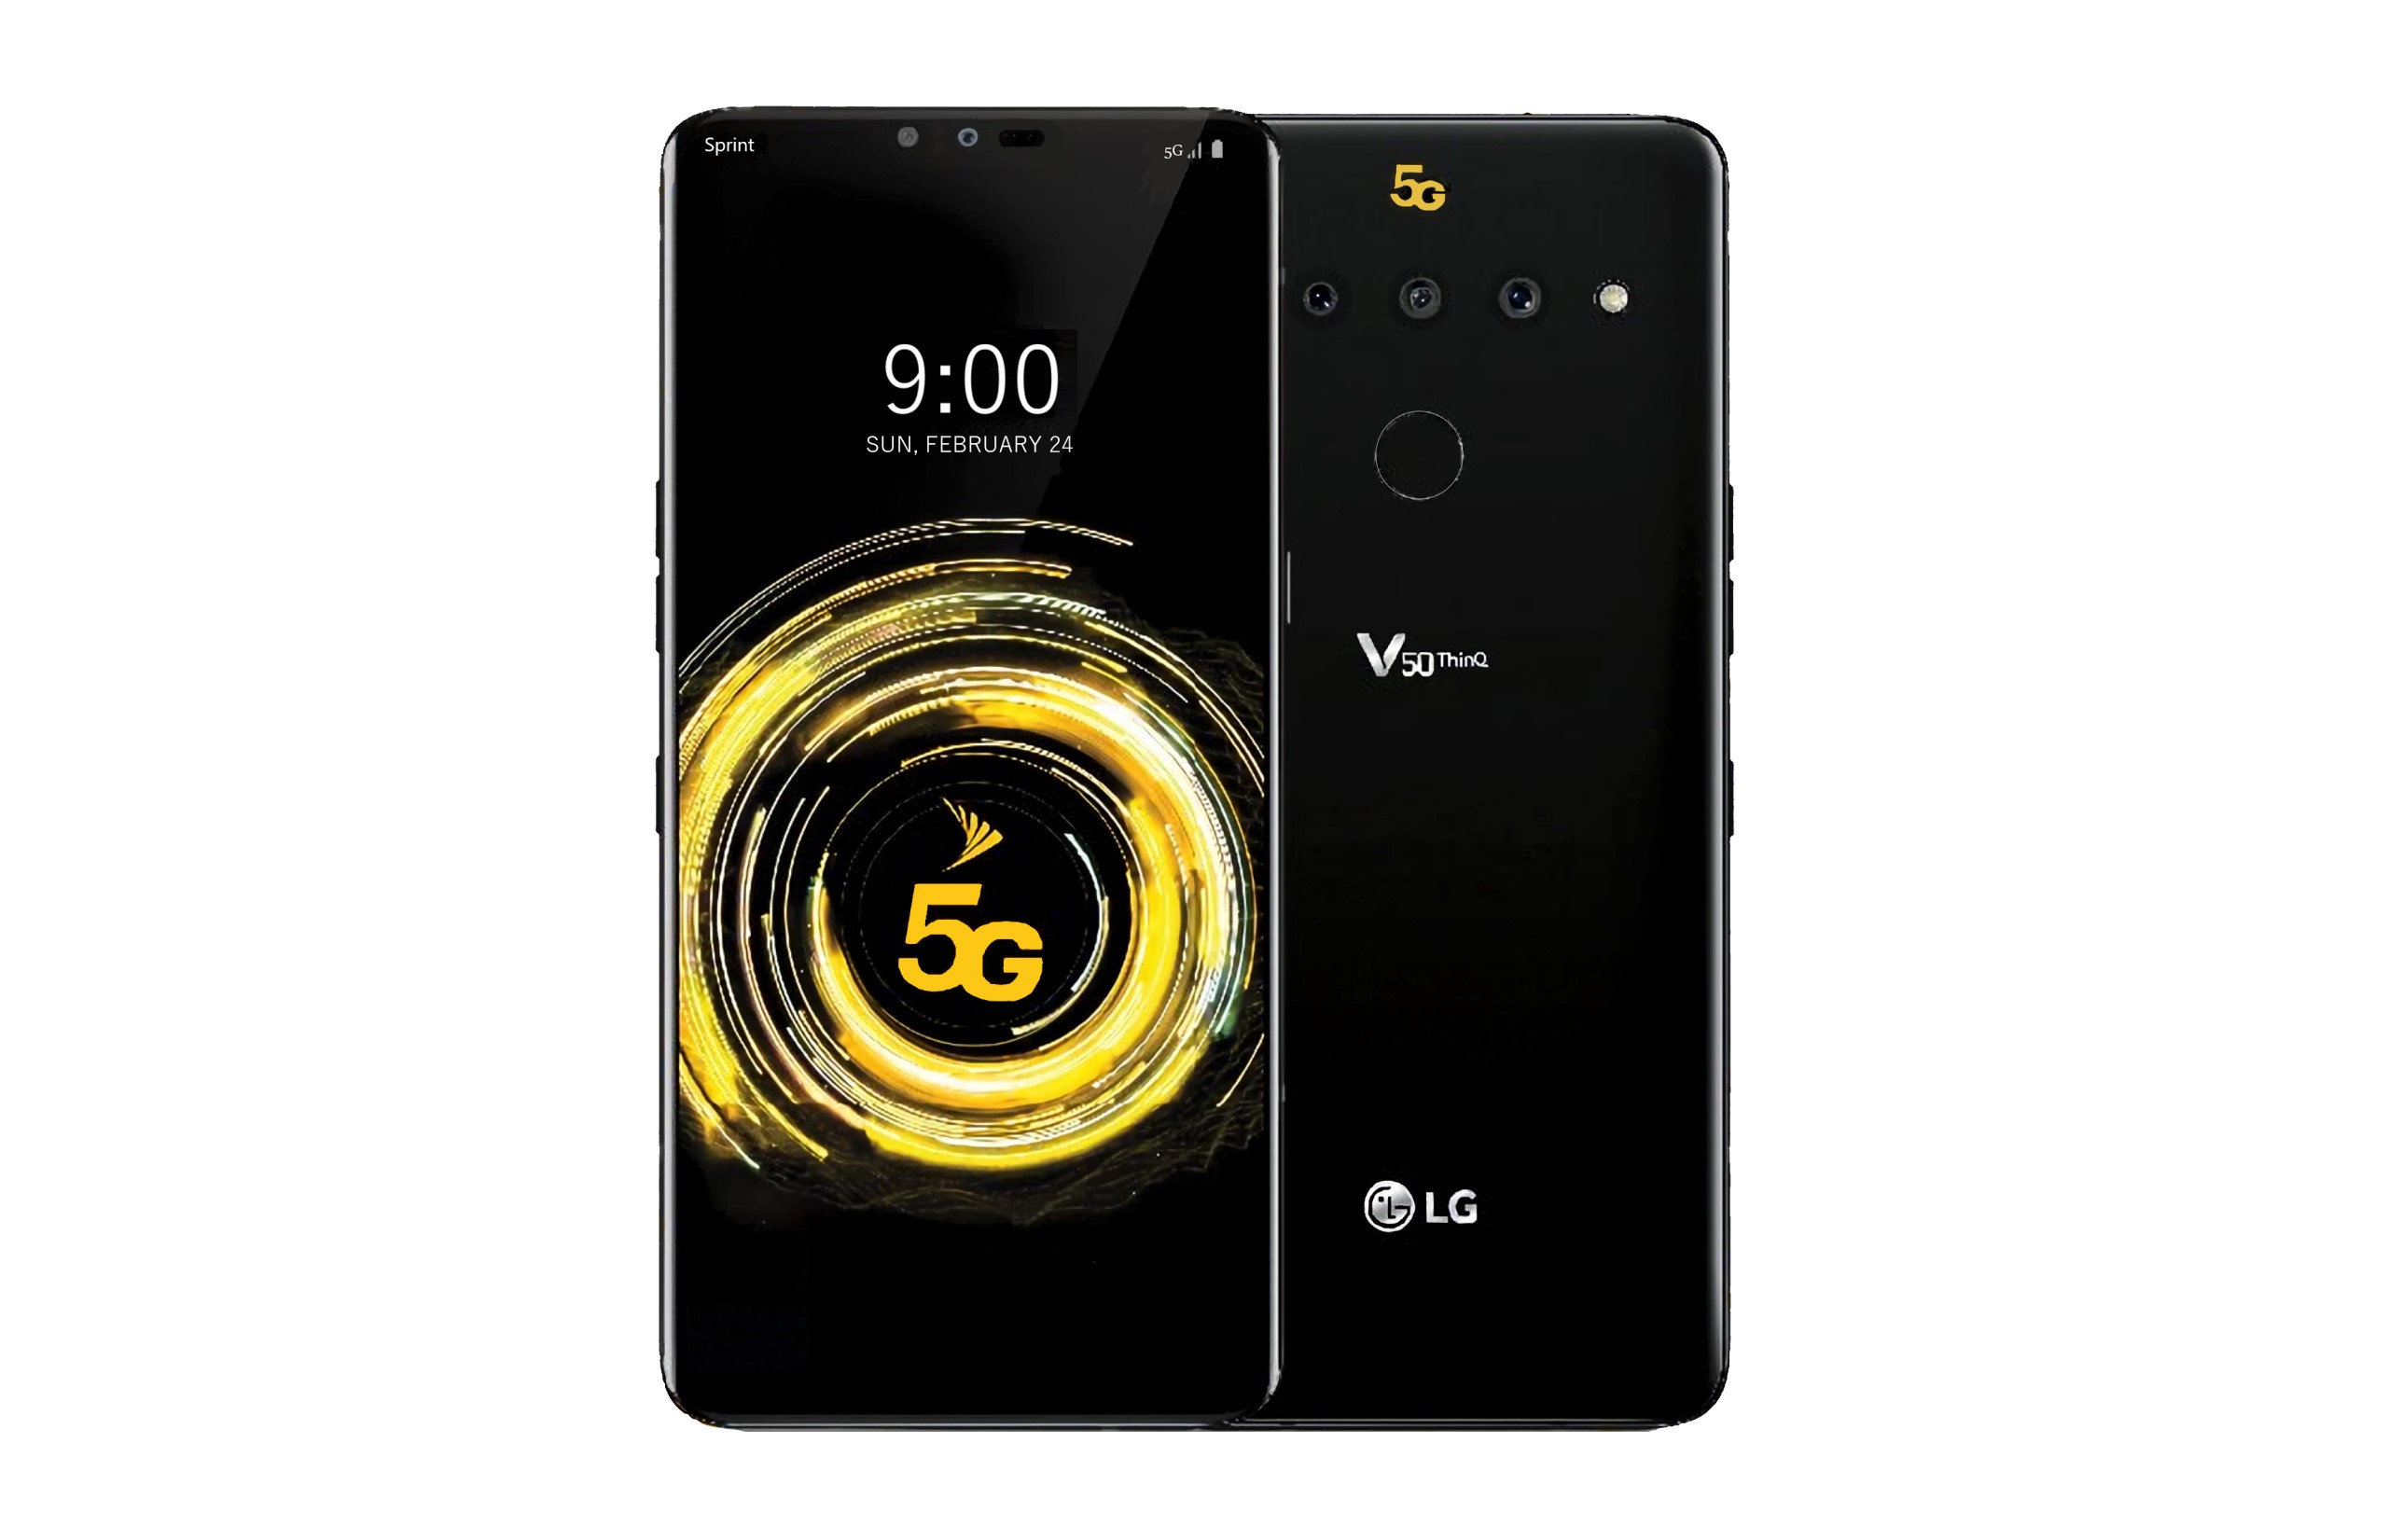 In the race to the first 5G phones, here comes the LG V50